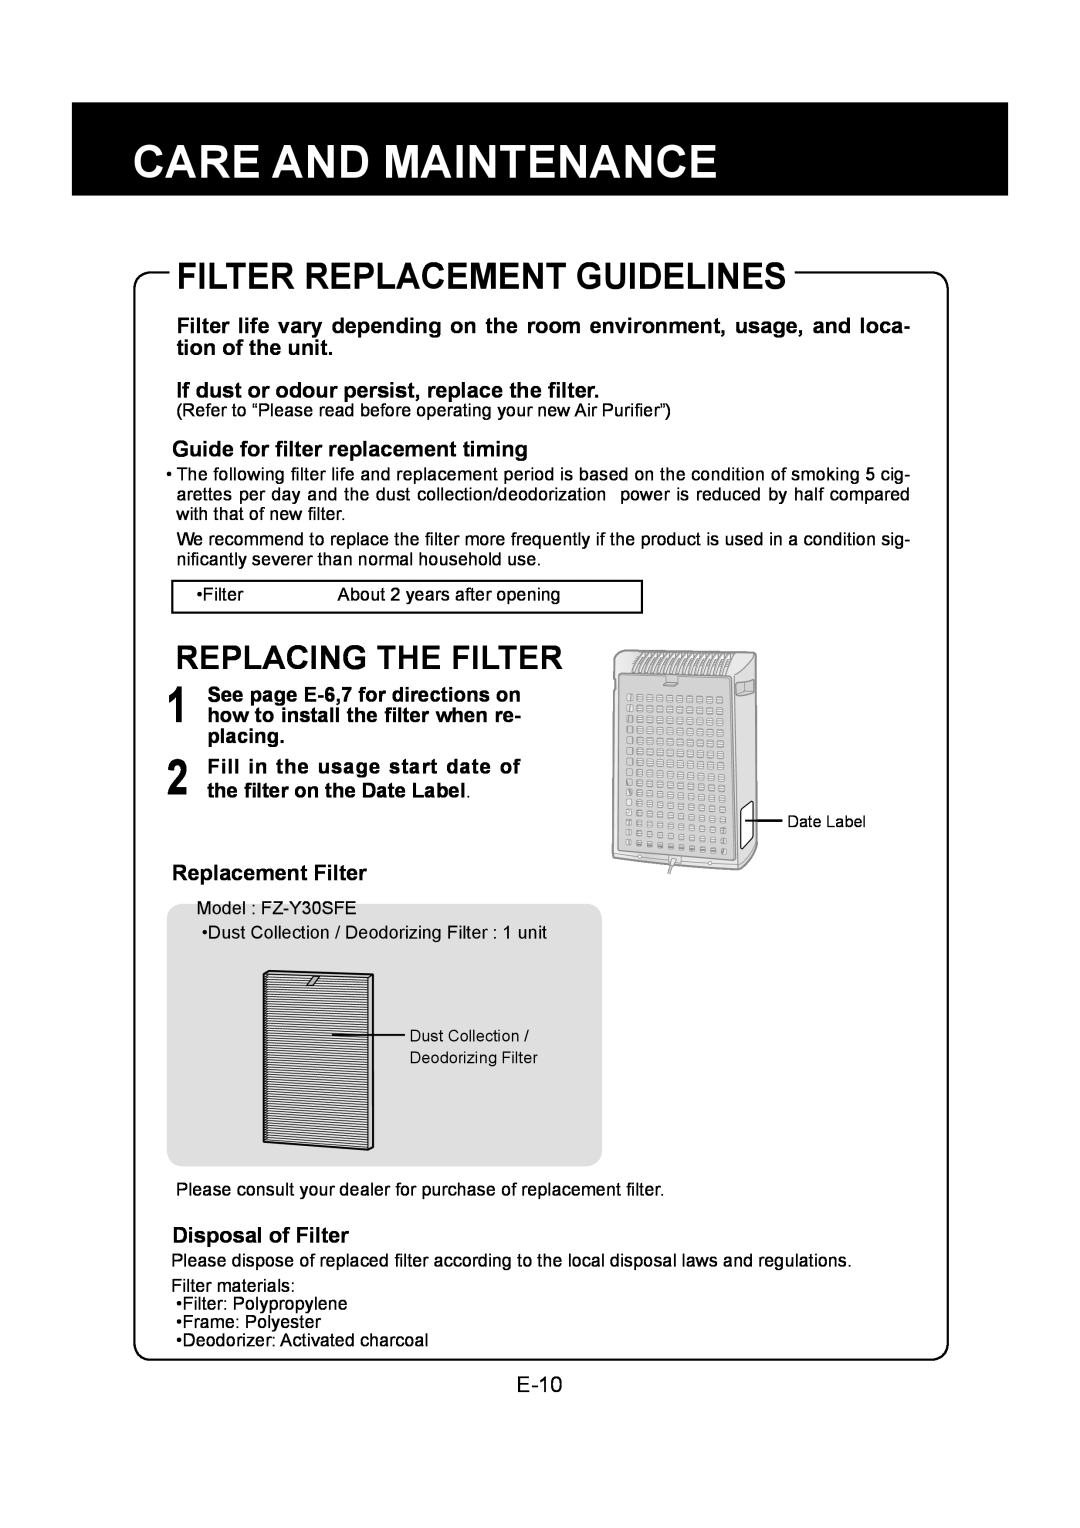 Sharp FU-Y30EU Filter Replacement Guidelines, Replacing The Filter, Care And Maintenance, Replacement Filter, E-10 